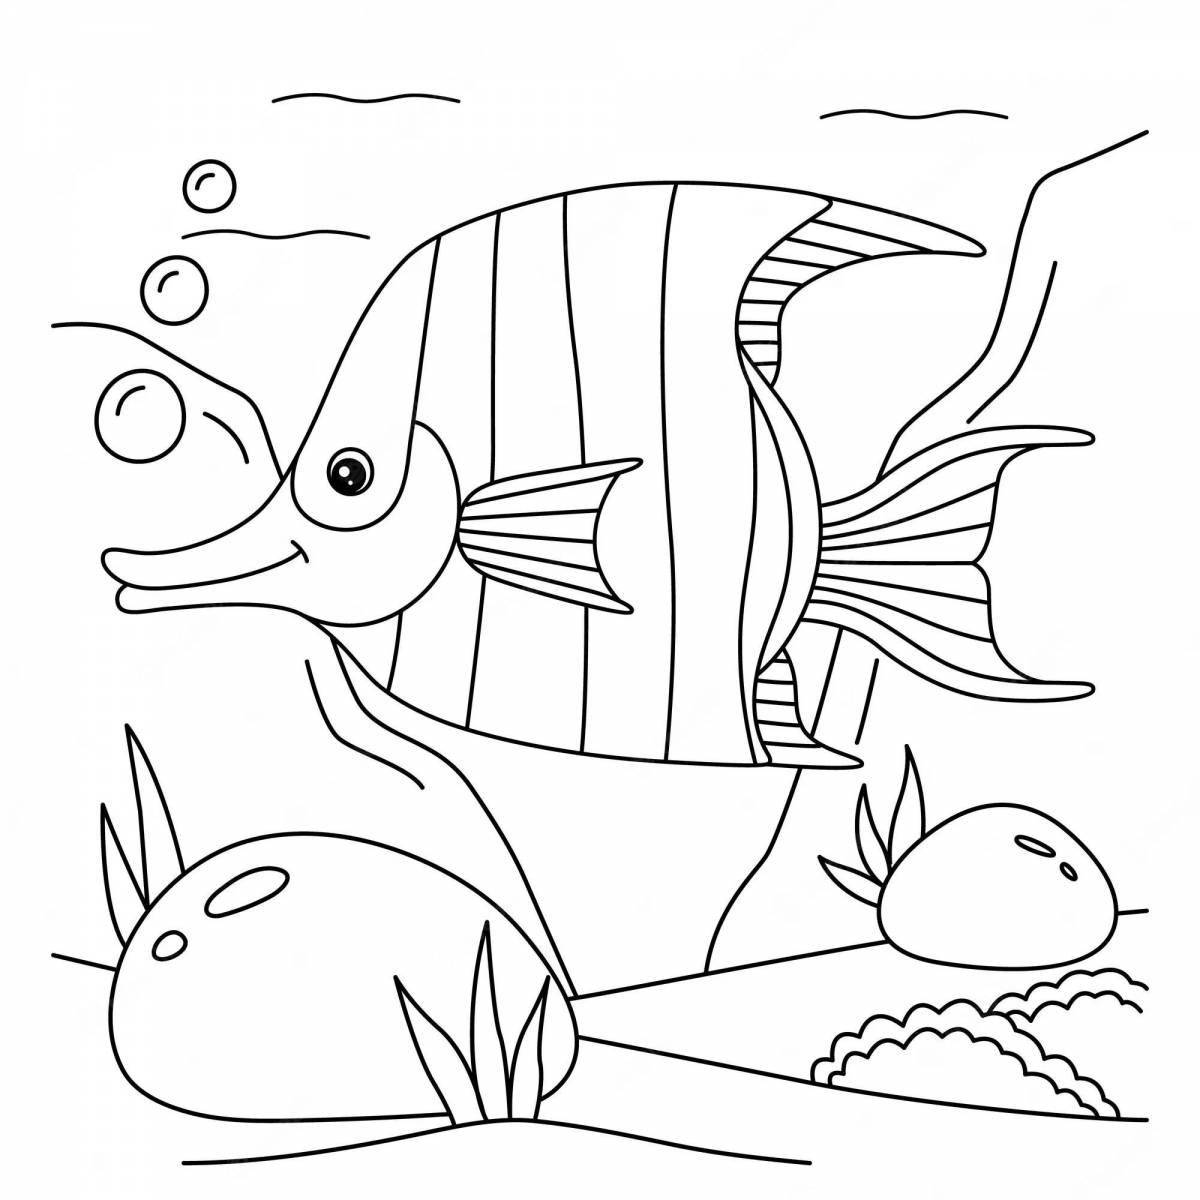 Colorful aquarium fish coloring page for 5-6 year olds